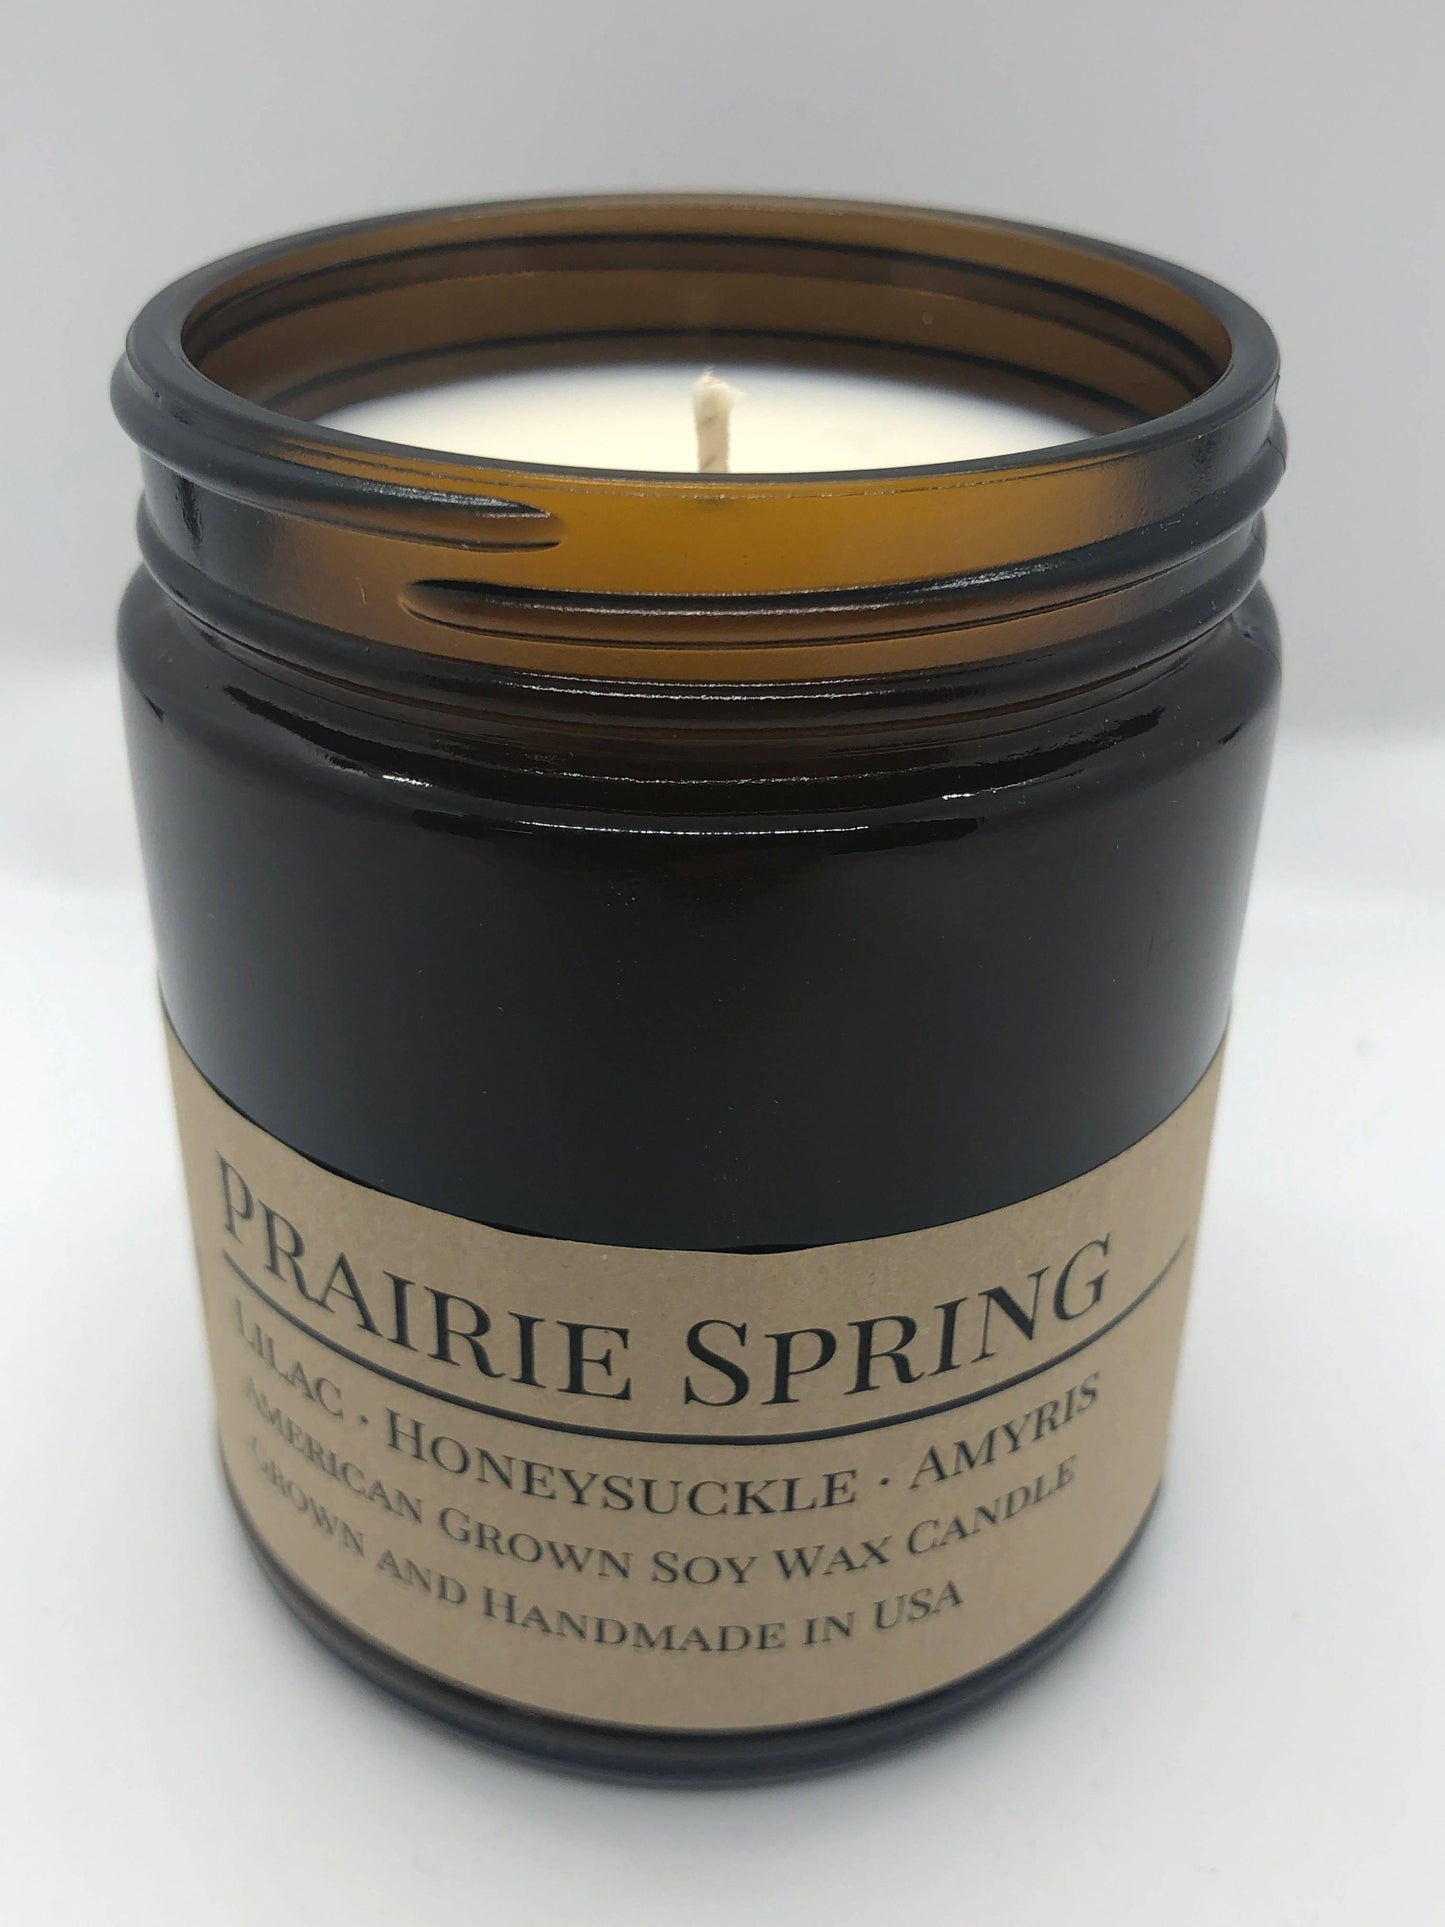 prairie spring soy wax candle | 9 oz amber apothecary jar by prairie fire tallow, candles, and lavender